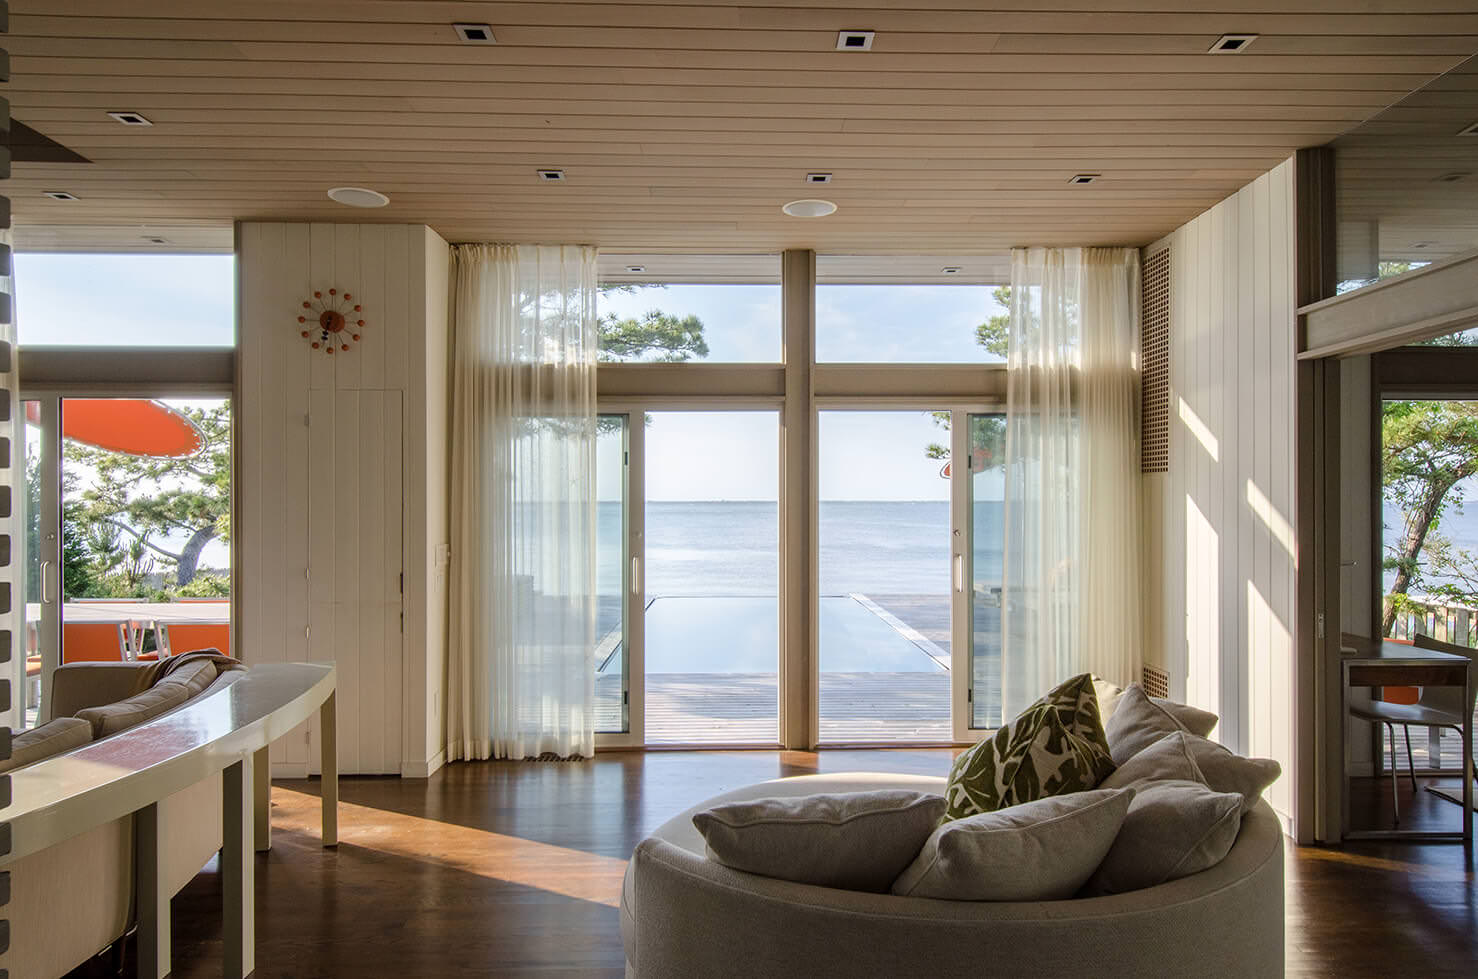 Fire Island Pines Living Room Architecture | Rodman Paul Architects